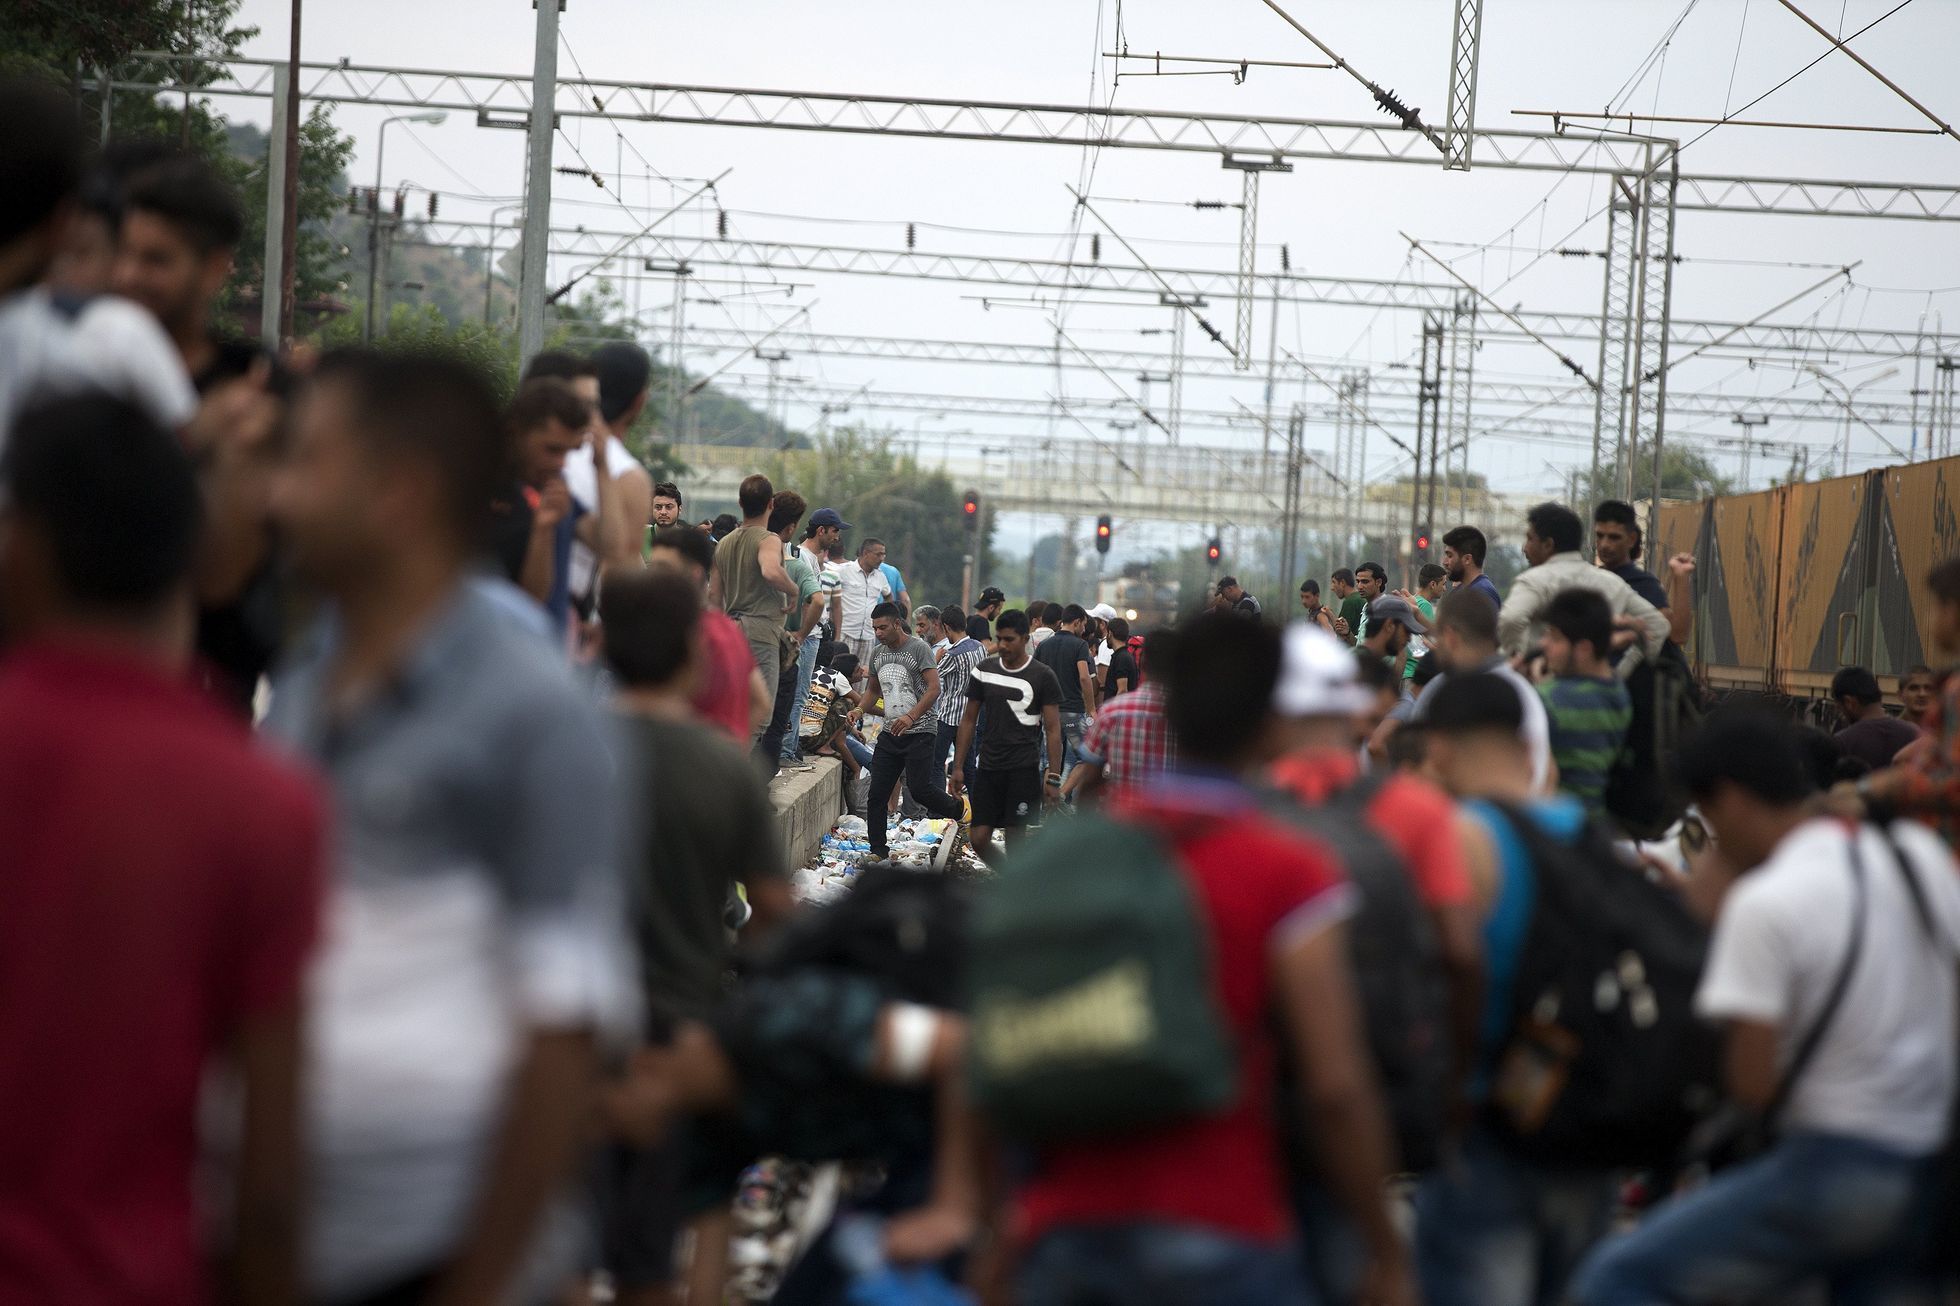 Migrants wait for a train to arrive, at Gevgelija train station in Macedonia